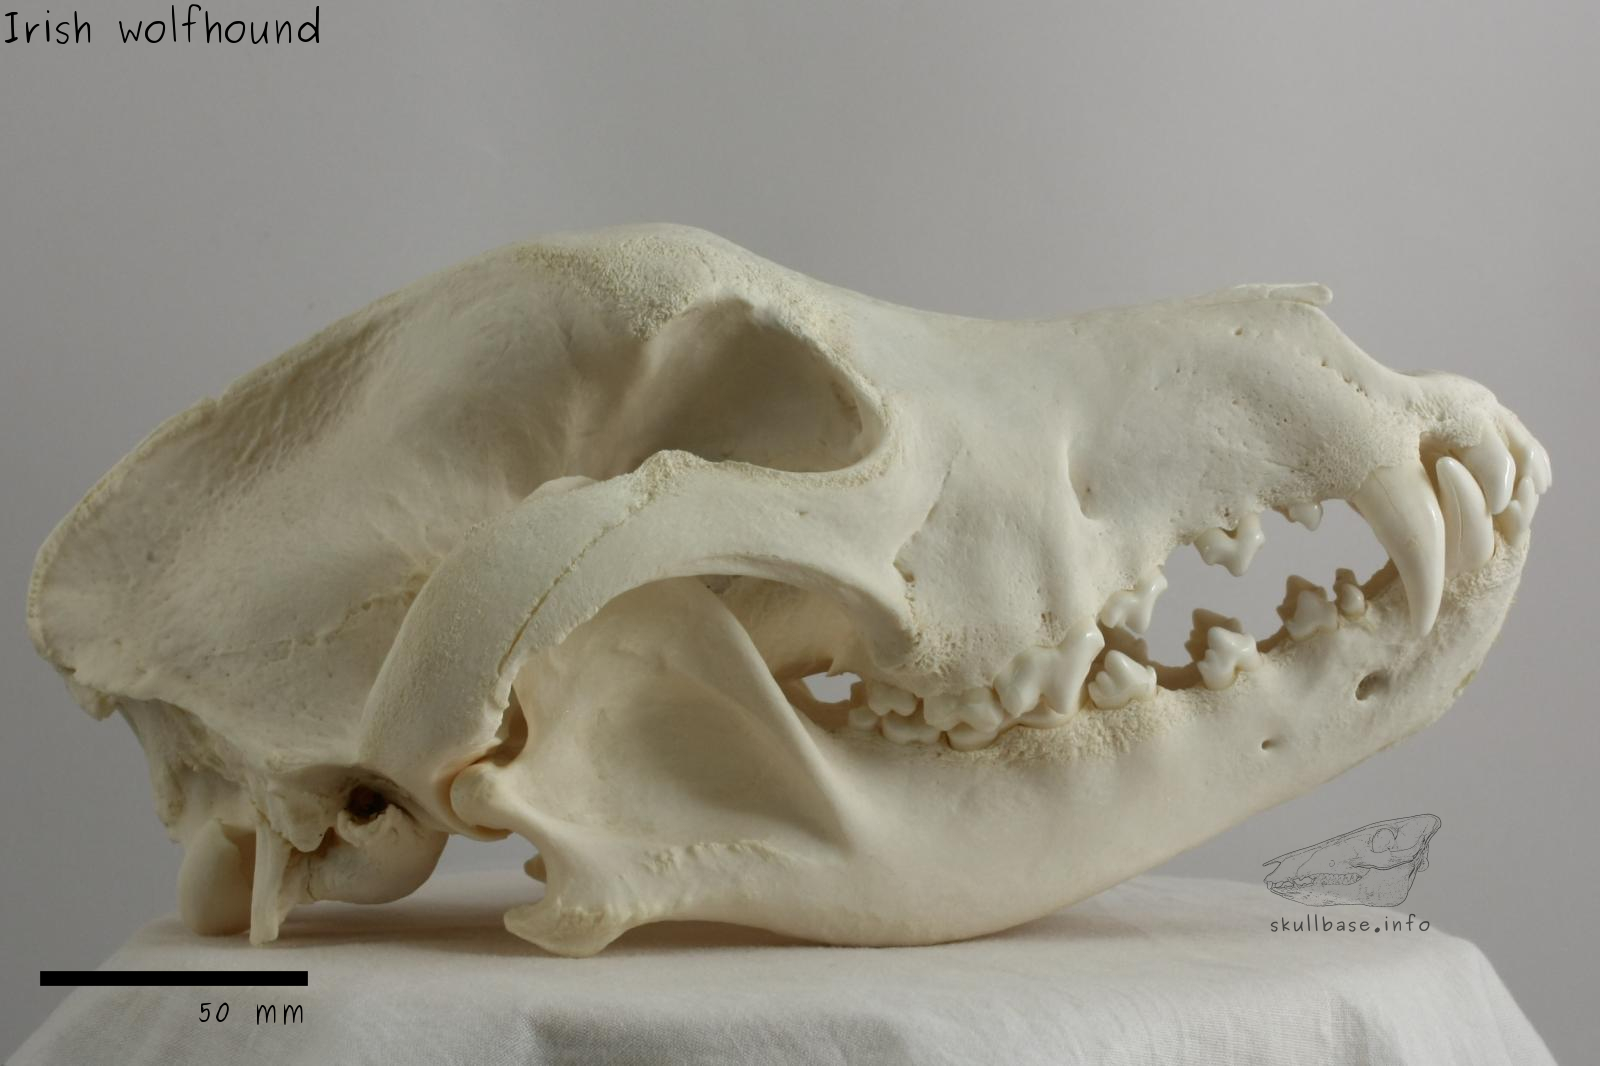 Irish wolfhound (Canis lupus familiaris) skull lateral view